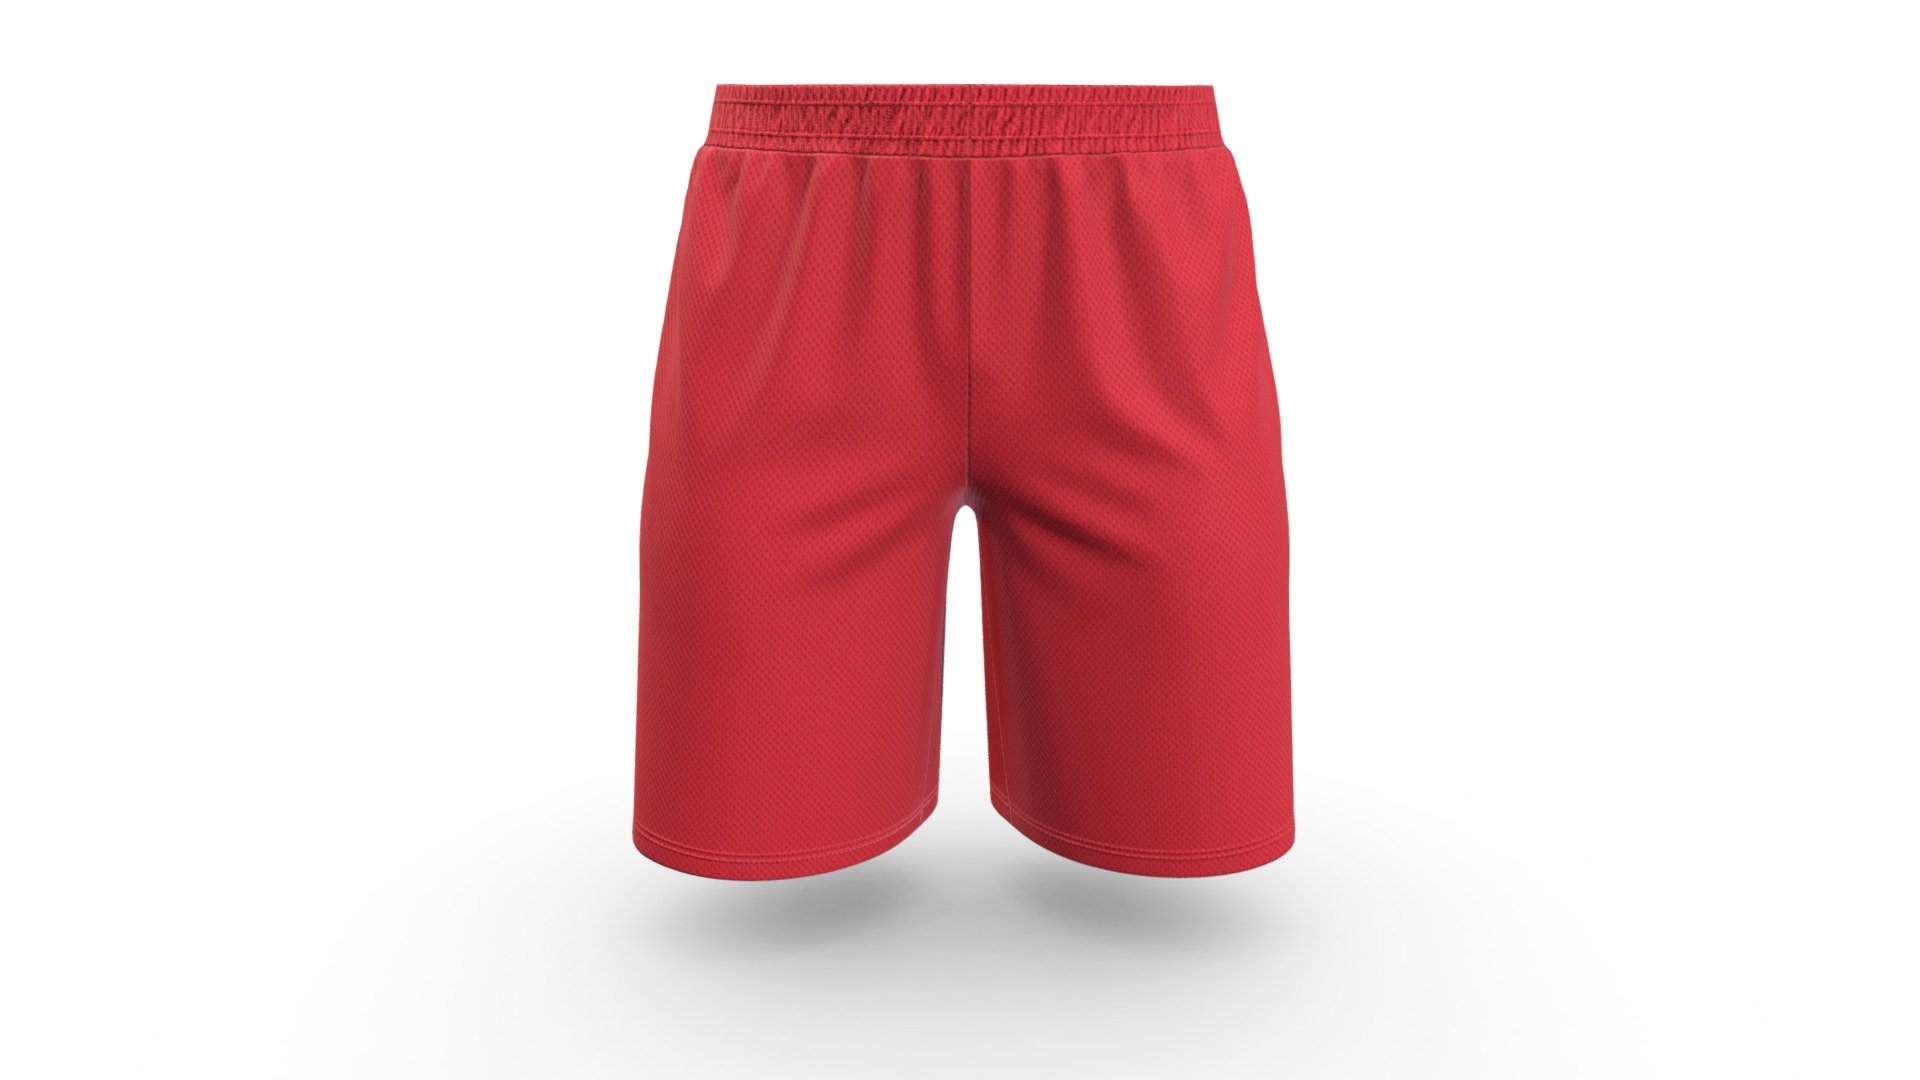 Men Basketball Shorts
Version V1.0

Realistic high detailed Men Shorts with high resolution textures. Model created by our unique processing &amp; Optimized for 3D web and AR / VR

Features

Optimized &amp; NON-Optimized obj model with 4K texture included




Optimized for AR/VR/MR

4K &amp; 2K fabric texture and print details

Optimized model is 925KB

NON-Optimized model is 8.19MB

Knit fabric texture details included

GLB file in 2k texture size is 4.42MB

GLB file in 4k texture size is 17.1MB  (Game &amp; Animation Ready)

Suitable for web application configurator development.

Fully unwrap UV

The model has 1 material

Includes high detailed normal map

Unit measurement was inch

Triangular Mesh with 8.4k Vertices

Texture map: Base color, OcclusionRoughnessMetallic(ORM), Normal

For more details or custom order send email: hello@binarycloth.com


Website:binarycloth.com - Men Apparel Basketball Shorts - Buy Royalty Free 3D model by BINARYCLOTH (@binaryclothofficial) 3d model